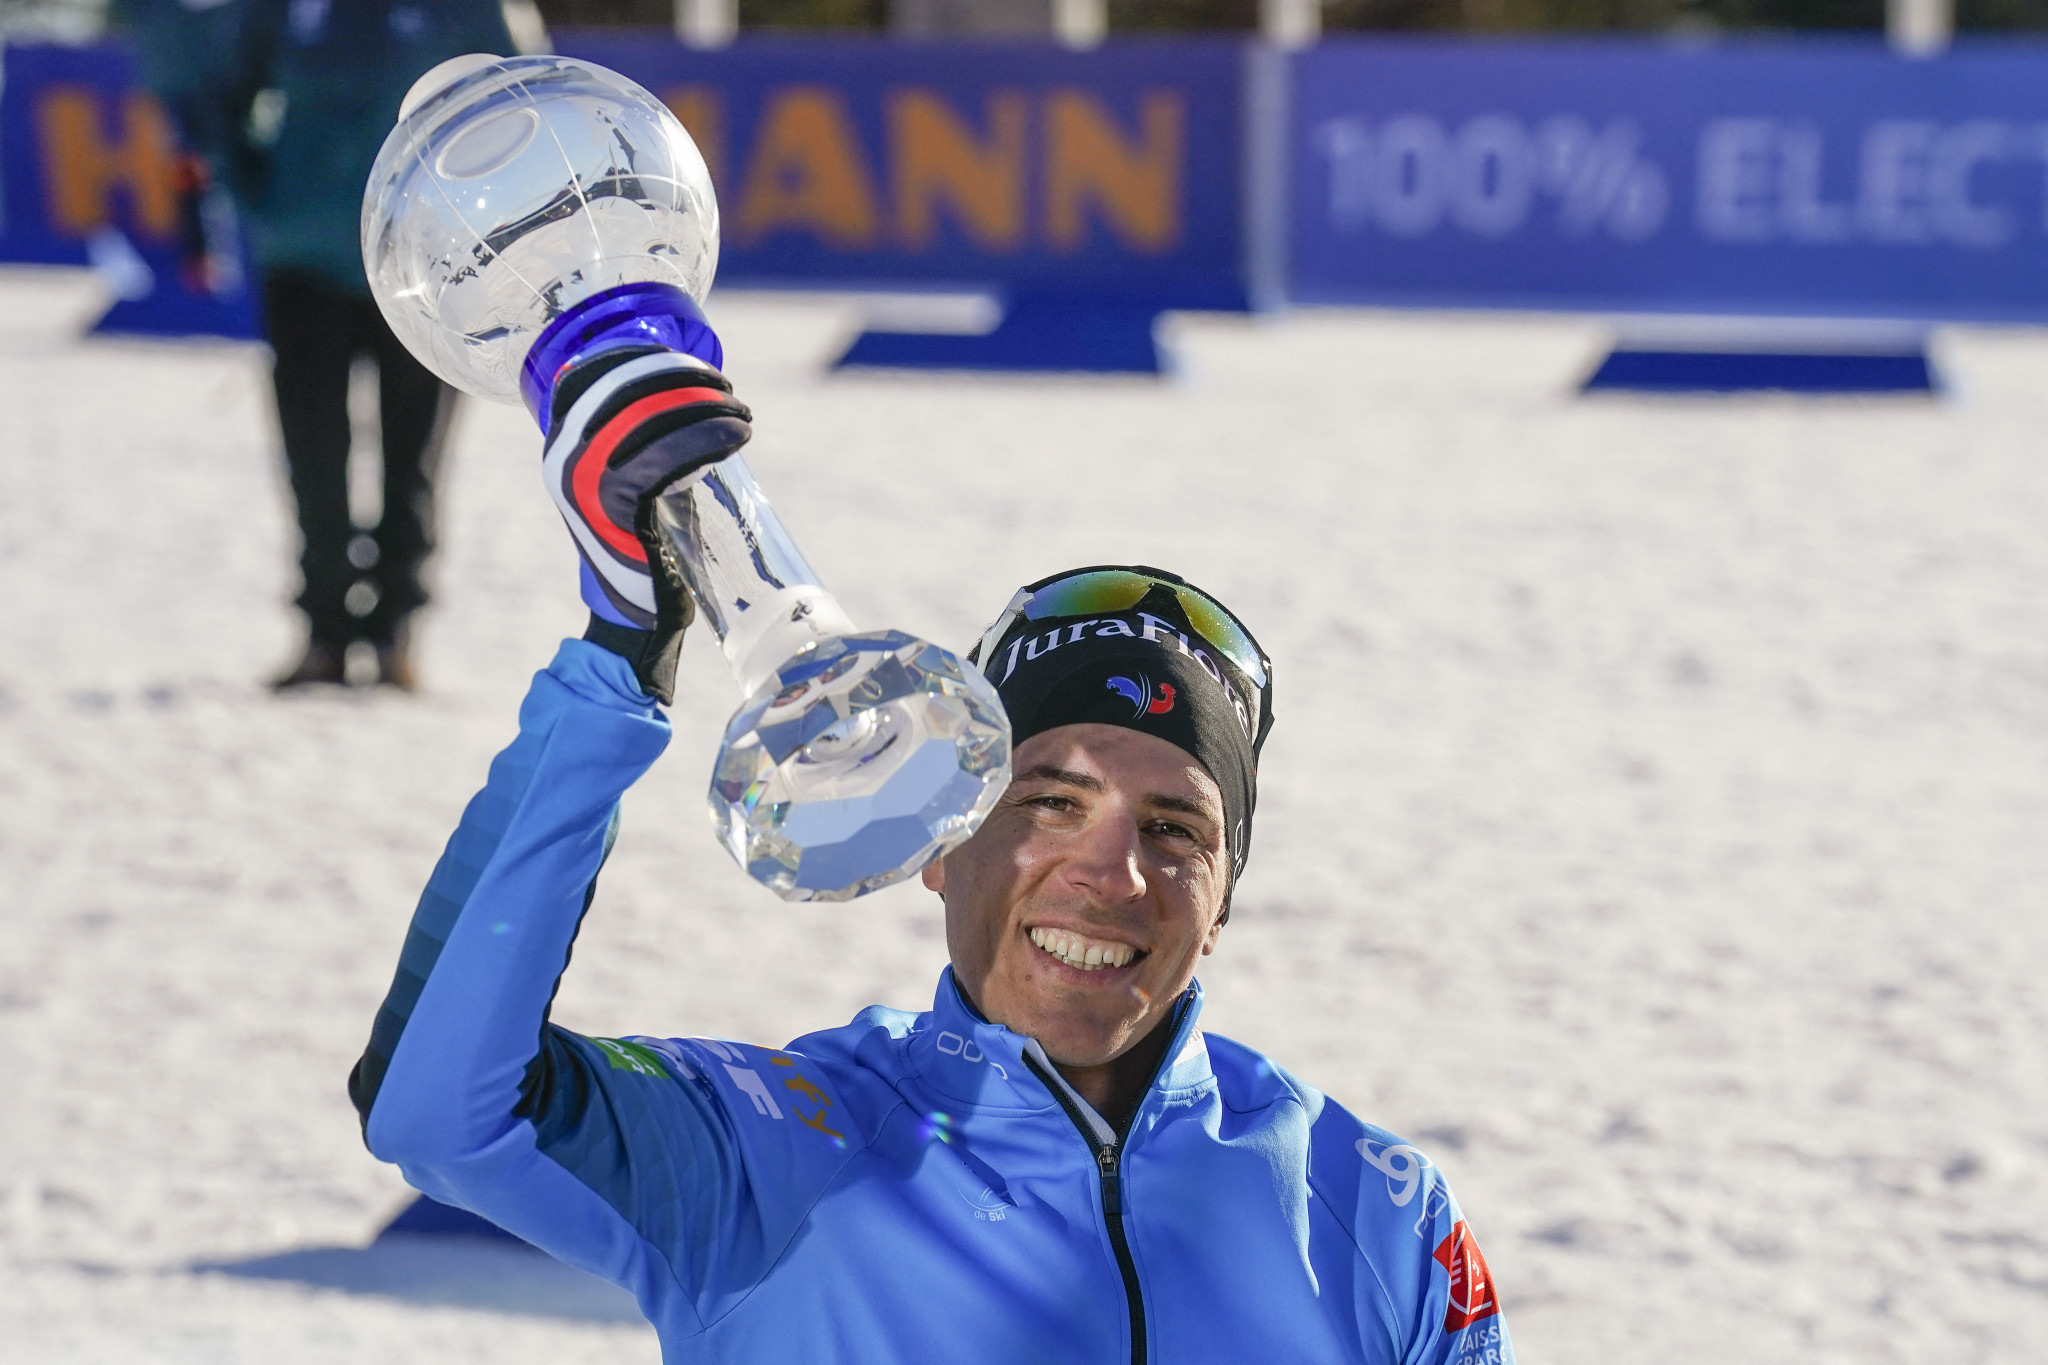 France's Quentin Fillon Maillet will look to defend his overall World Cup title ©Getty Images